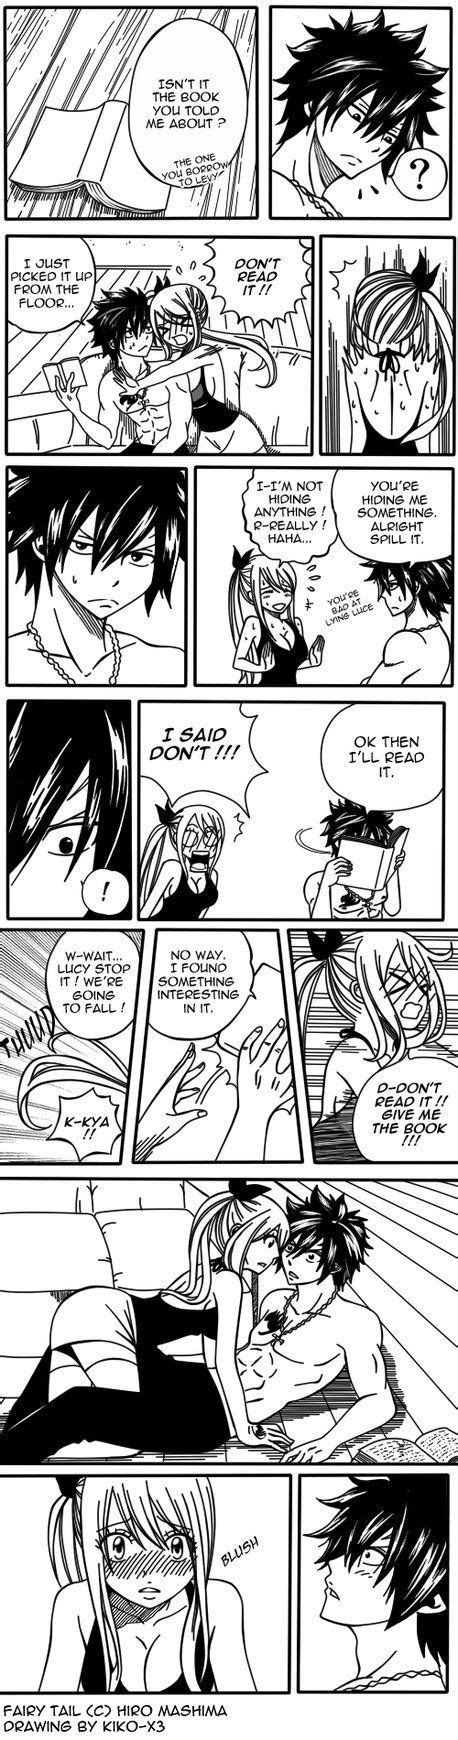 The Book 2 Gray X Lucy Fairy Tail Anime Fairy Tail Ships Fairy